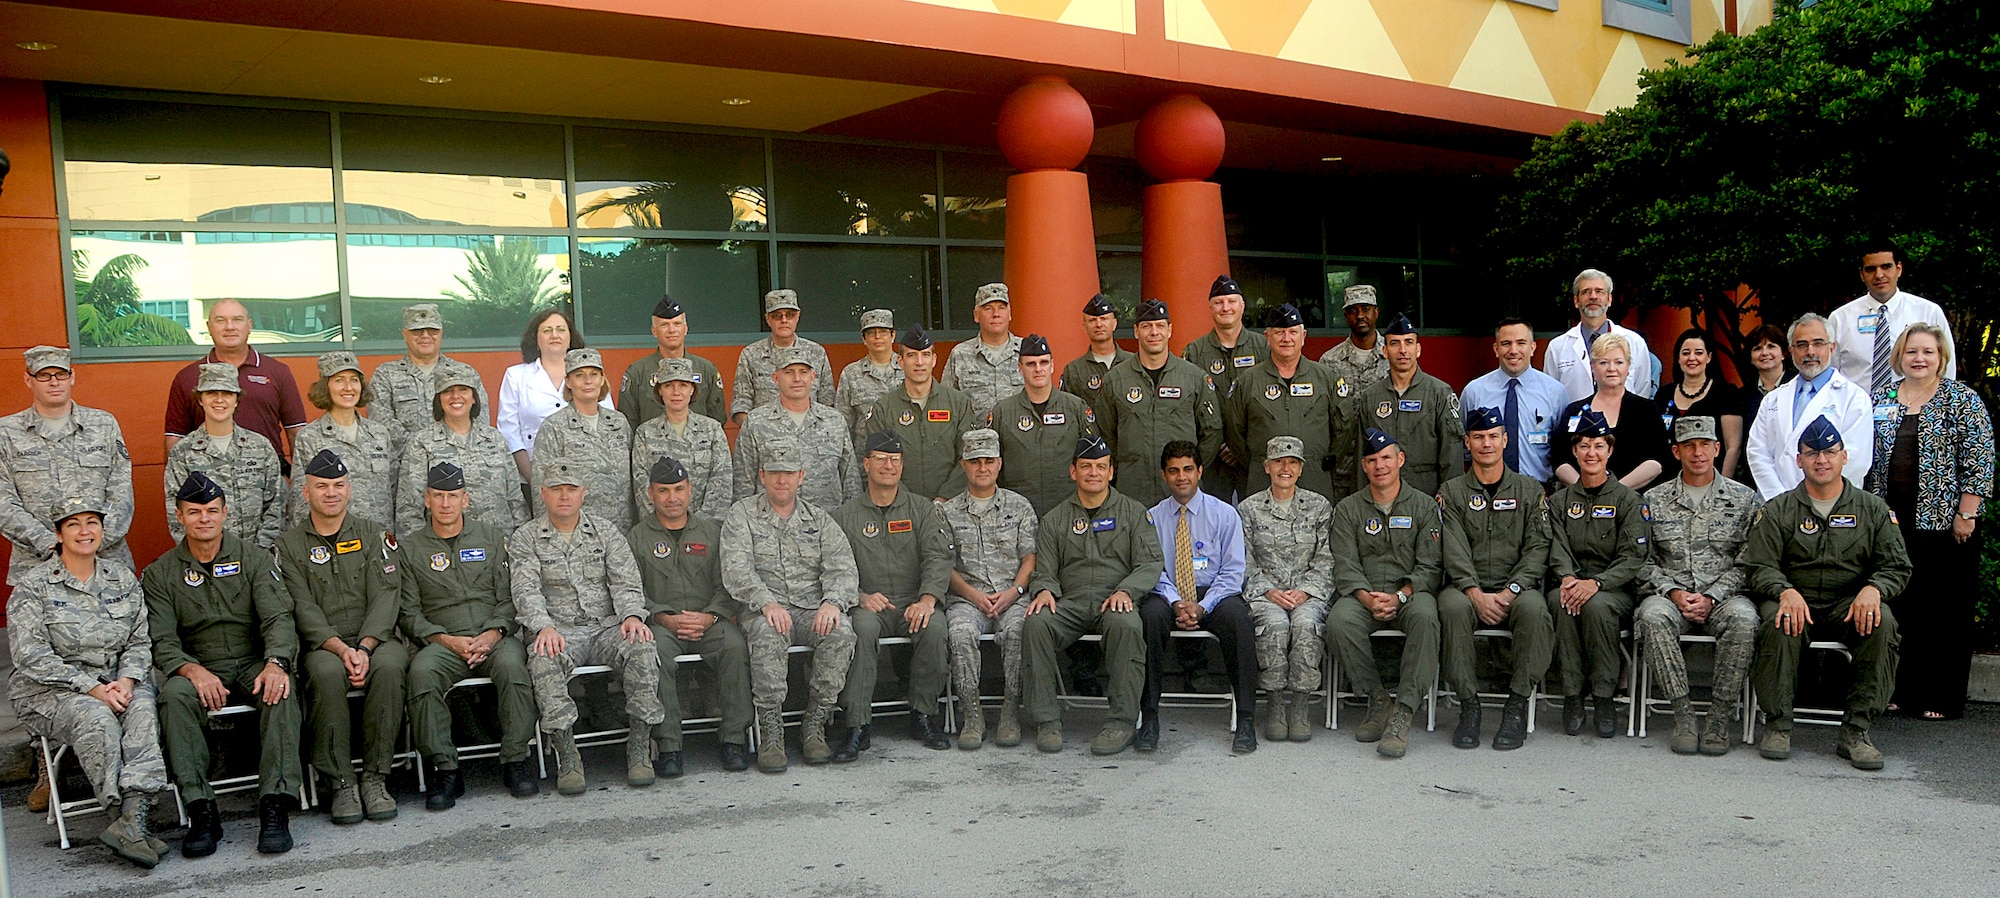 Twenty-eight commanders from the Reserve's 10th Air Force participated in a two day seminar on the Lean System, a managerial process designed to help identify waste, at Homestead Air Reserve Base and Miami Children's Hospital, Aug 10-11. The leadership was joined by  Major General Frank J. Padilla, Commander,10th Air Force. The seminar topic is right on point with where the U.S. military is headed considering by 2016, the military has to cut $100 billion in efficiencies, and $28 billion of that cut has to be made by the Air Force. (U.S. Air Force photo/Senior Airman Lou Burton)